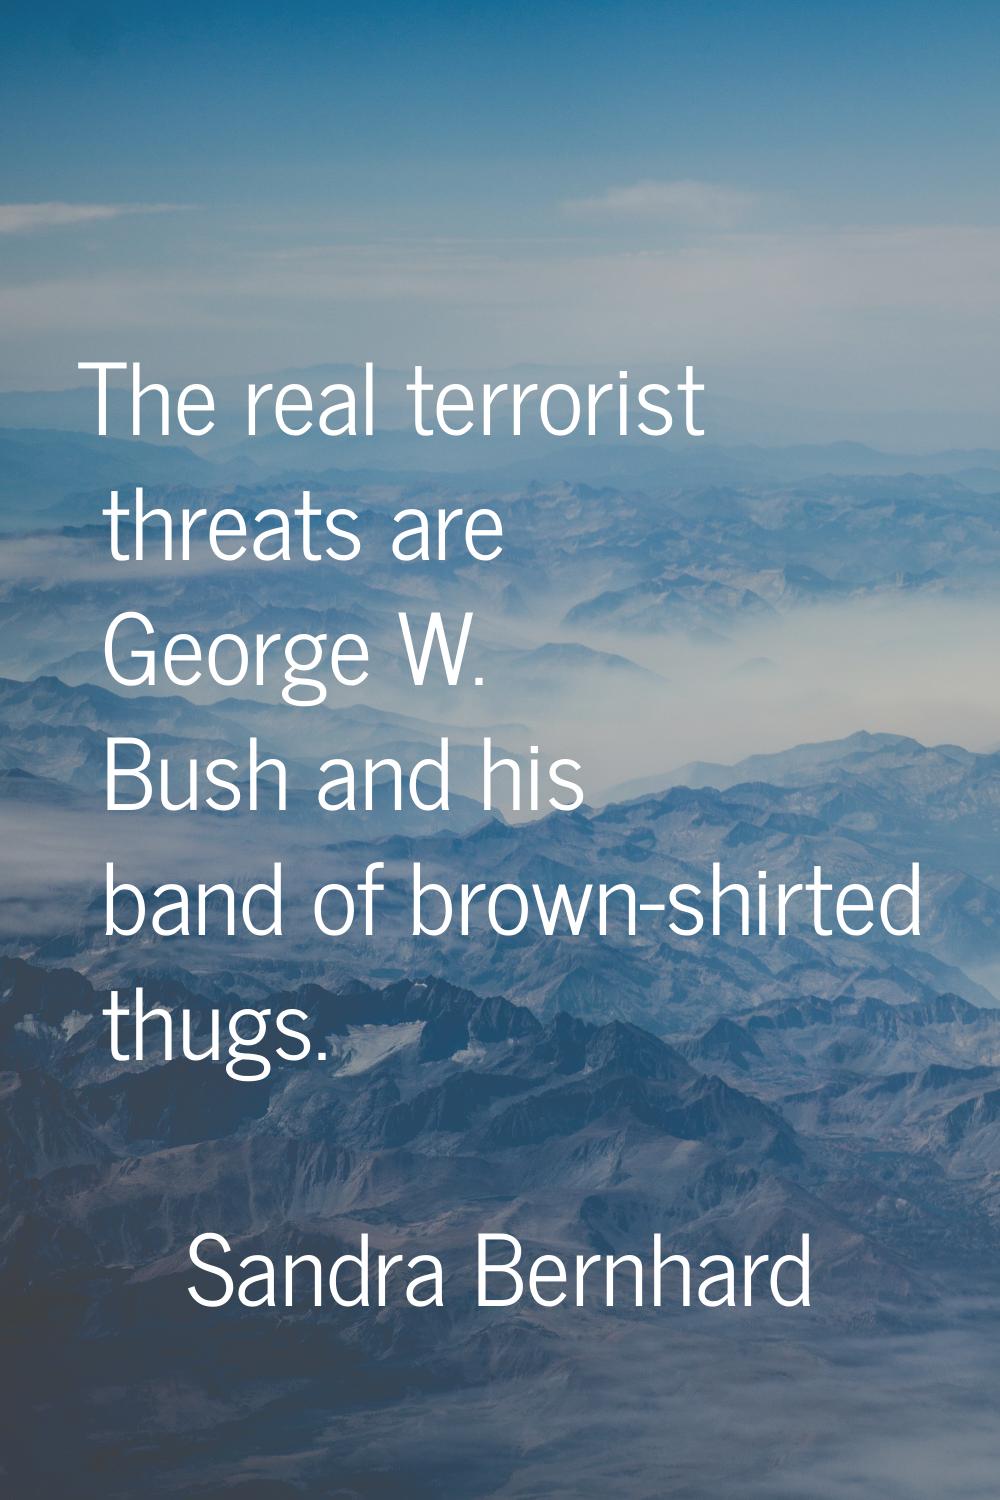 The real terrorist threats are George W. Bush and his band of brown-shirted thugs.